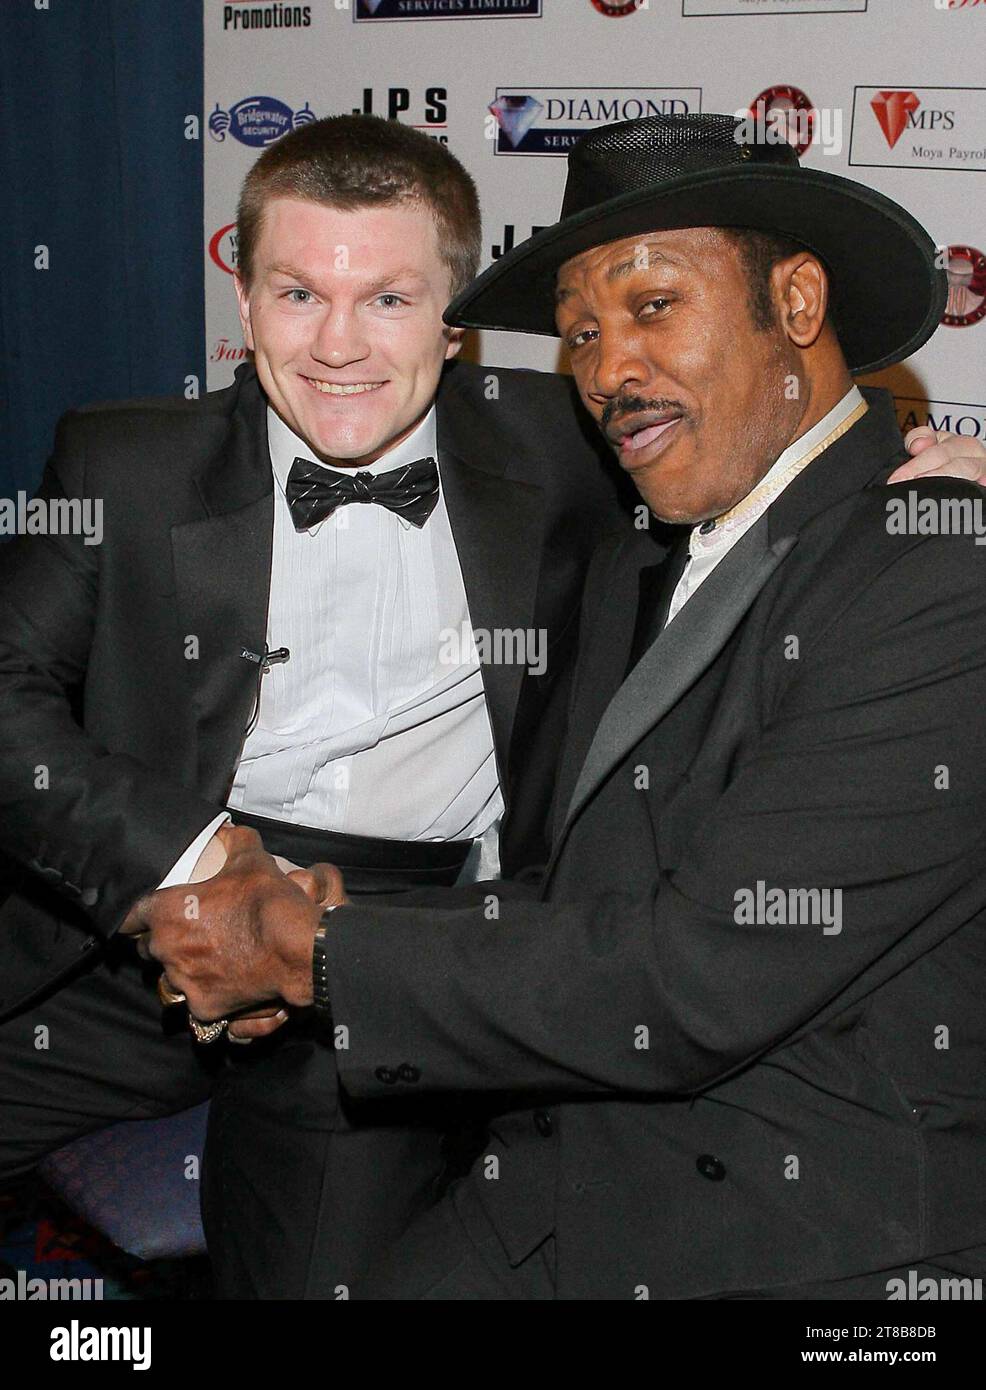 British boxer Ricky Hatton meets legendary US boxer Joe Frazier at the Piccadilly Hotel, Manchester, UK, 2006. Stock Photo